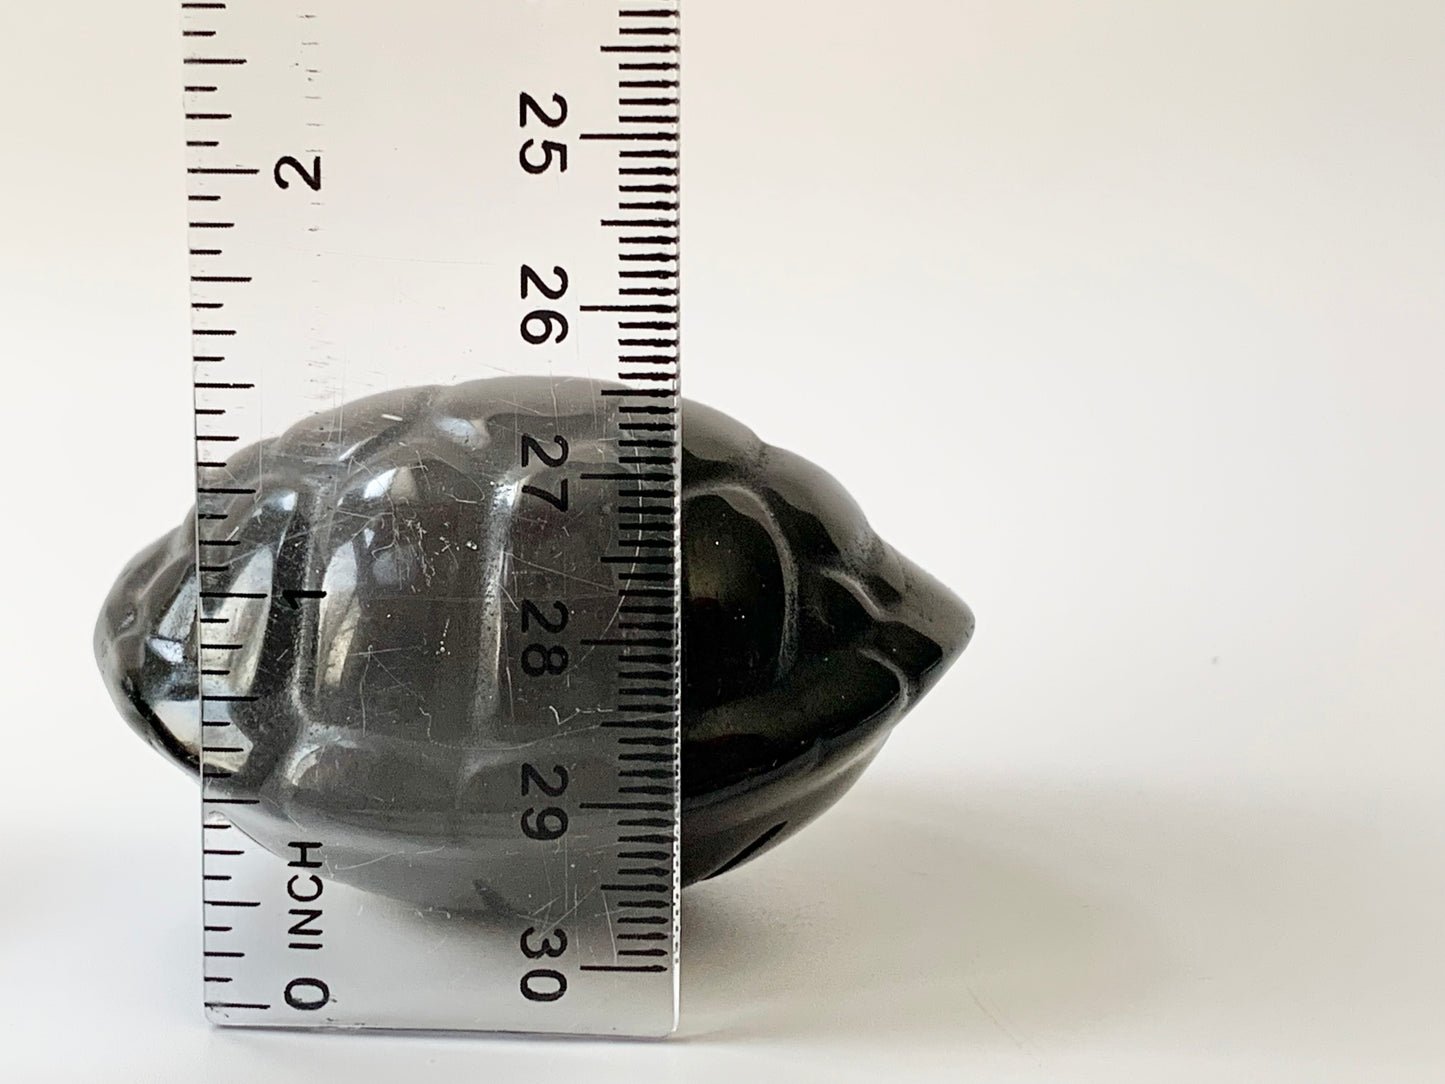 Turtle Shell Carving, obsidian